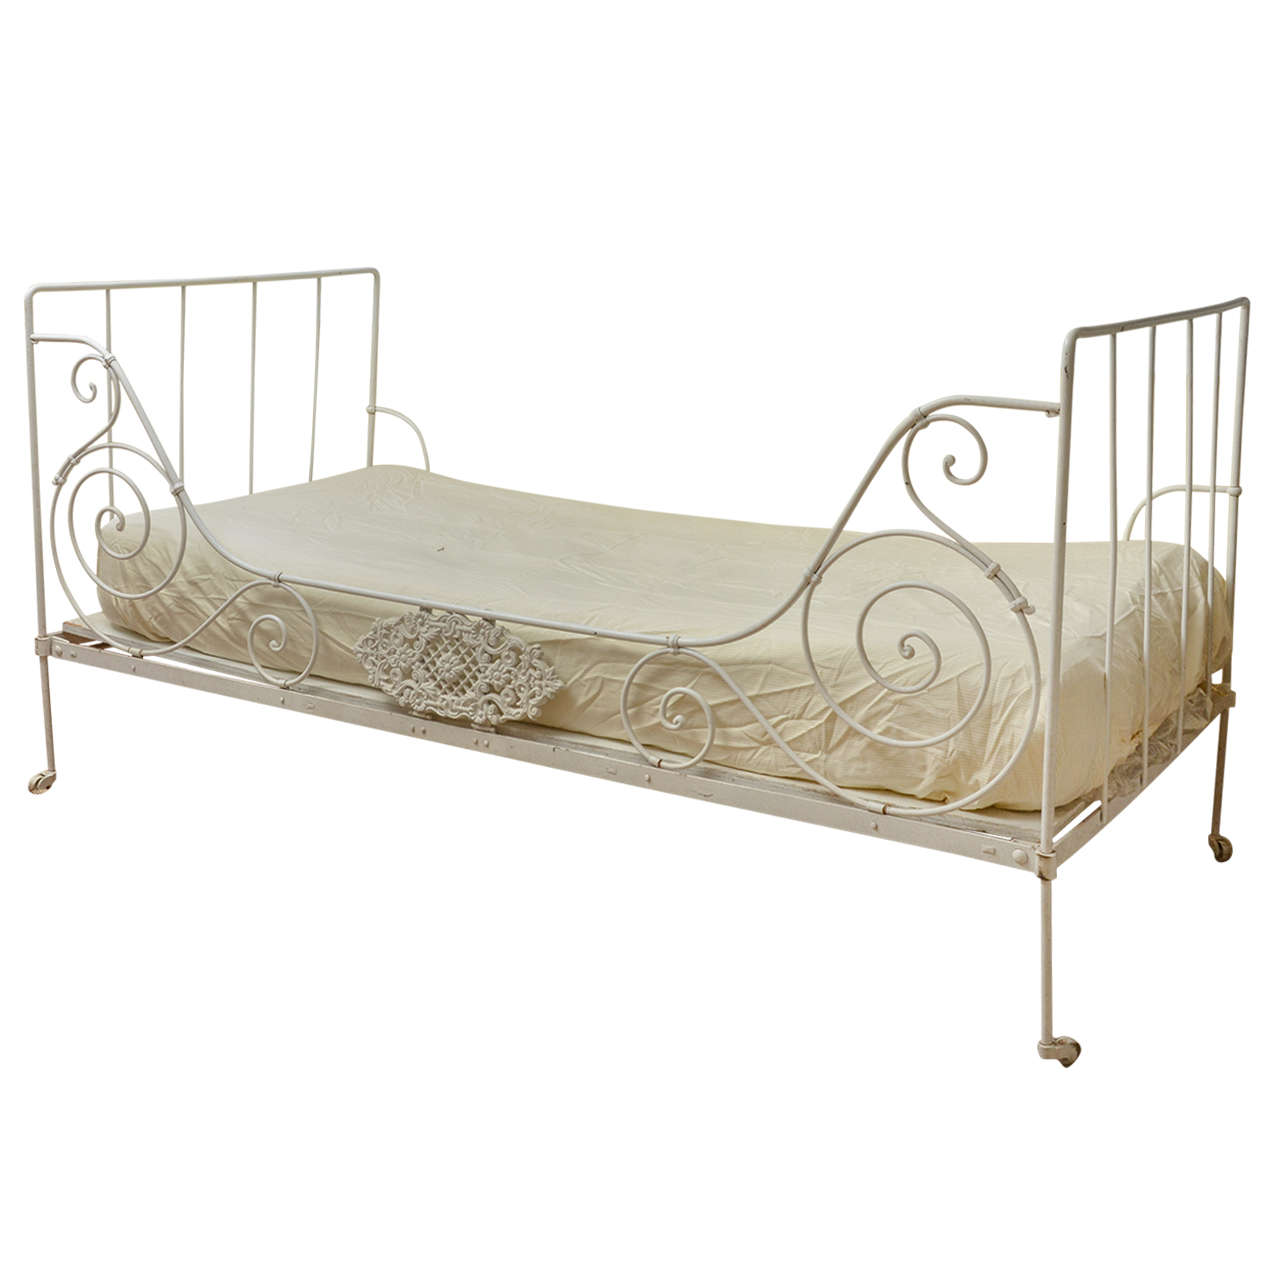 French 19th Century Iron Folding Daybed with Cross Hatched Design Medallion